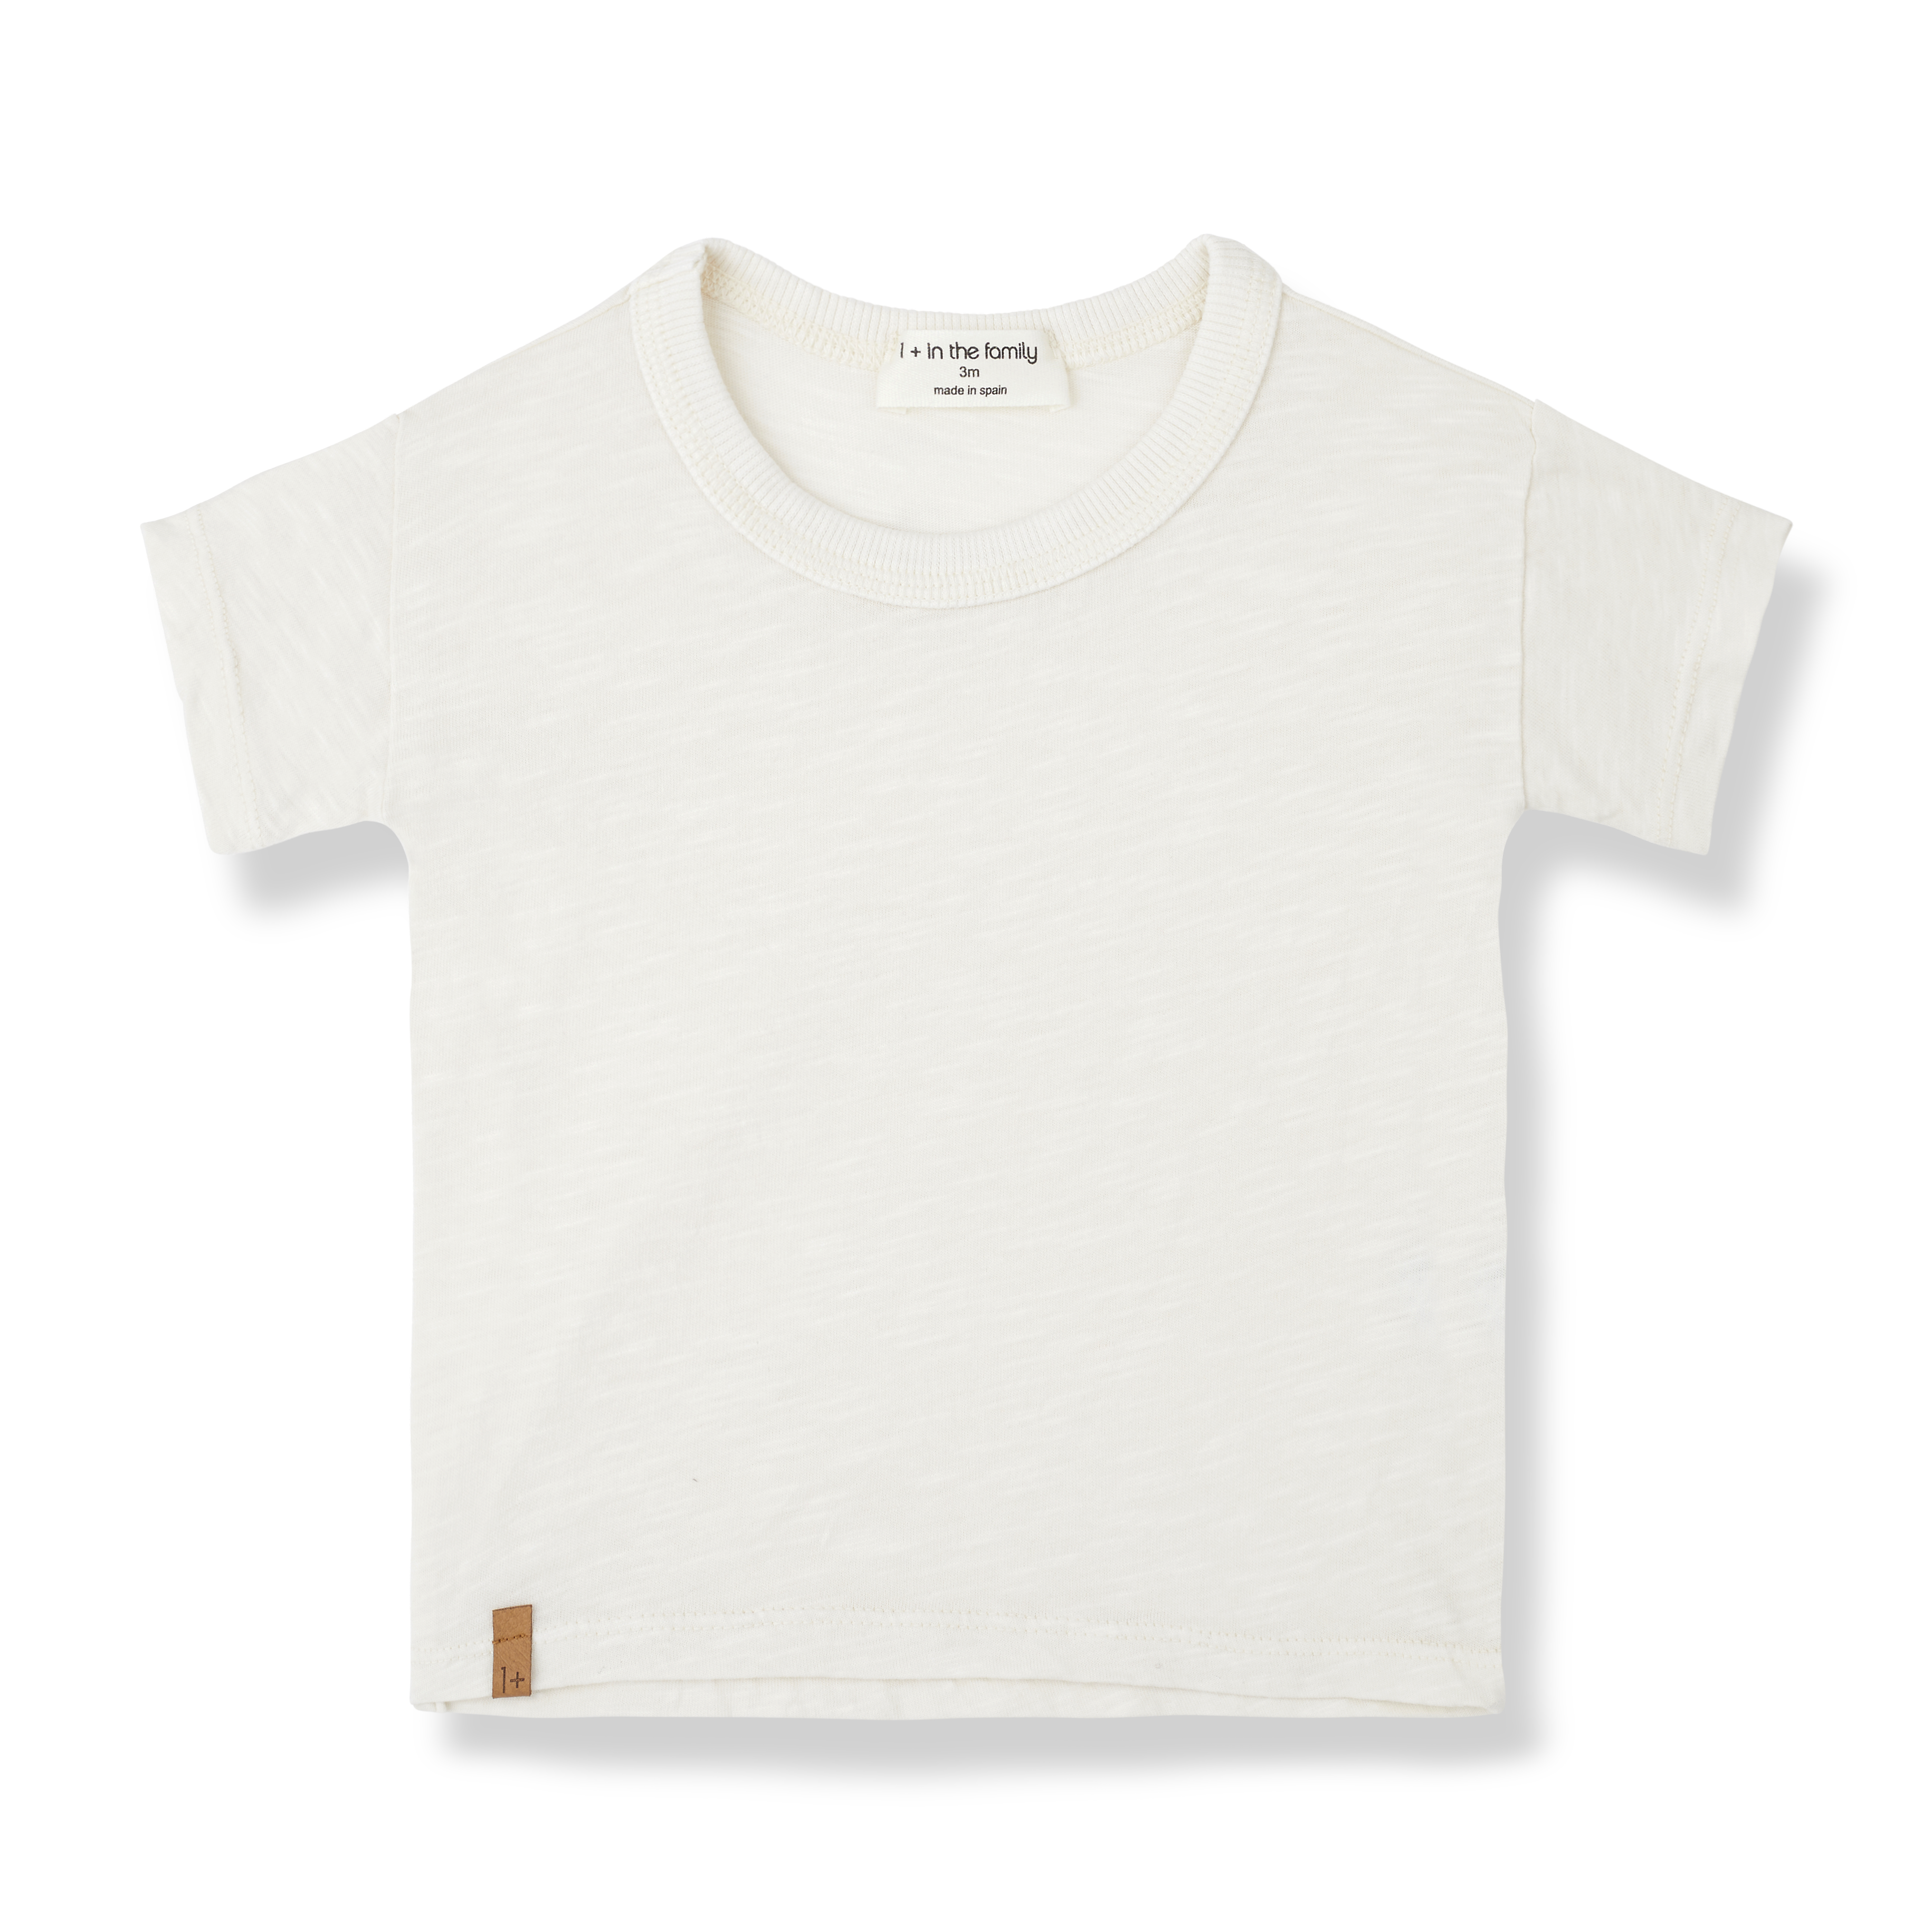 1+ in the family - aldos - jersey t-shirt - ivory